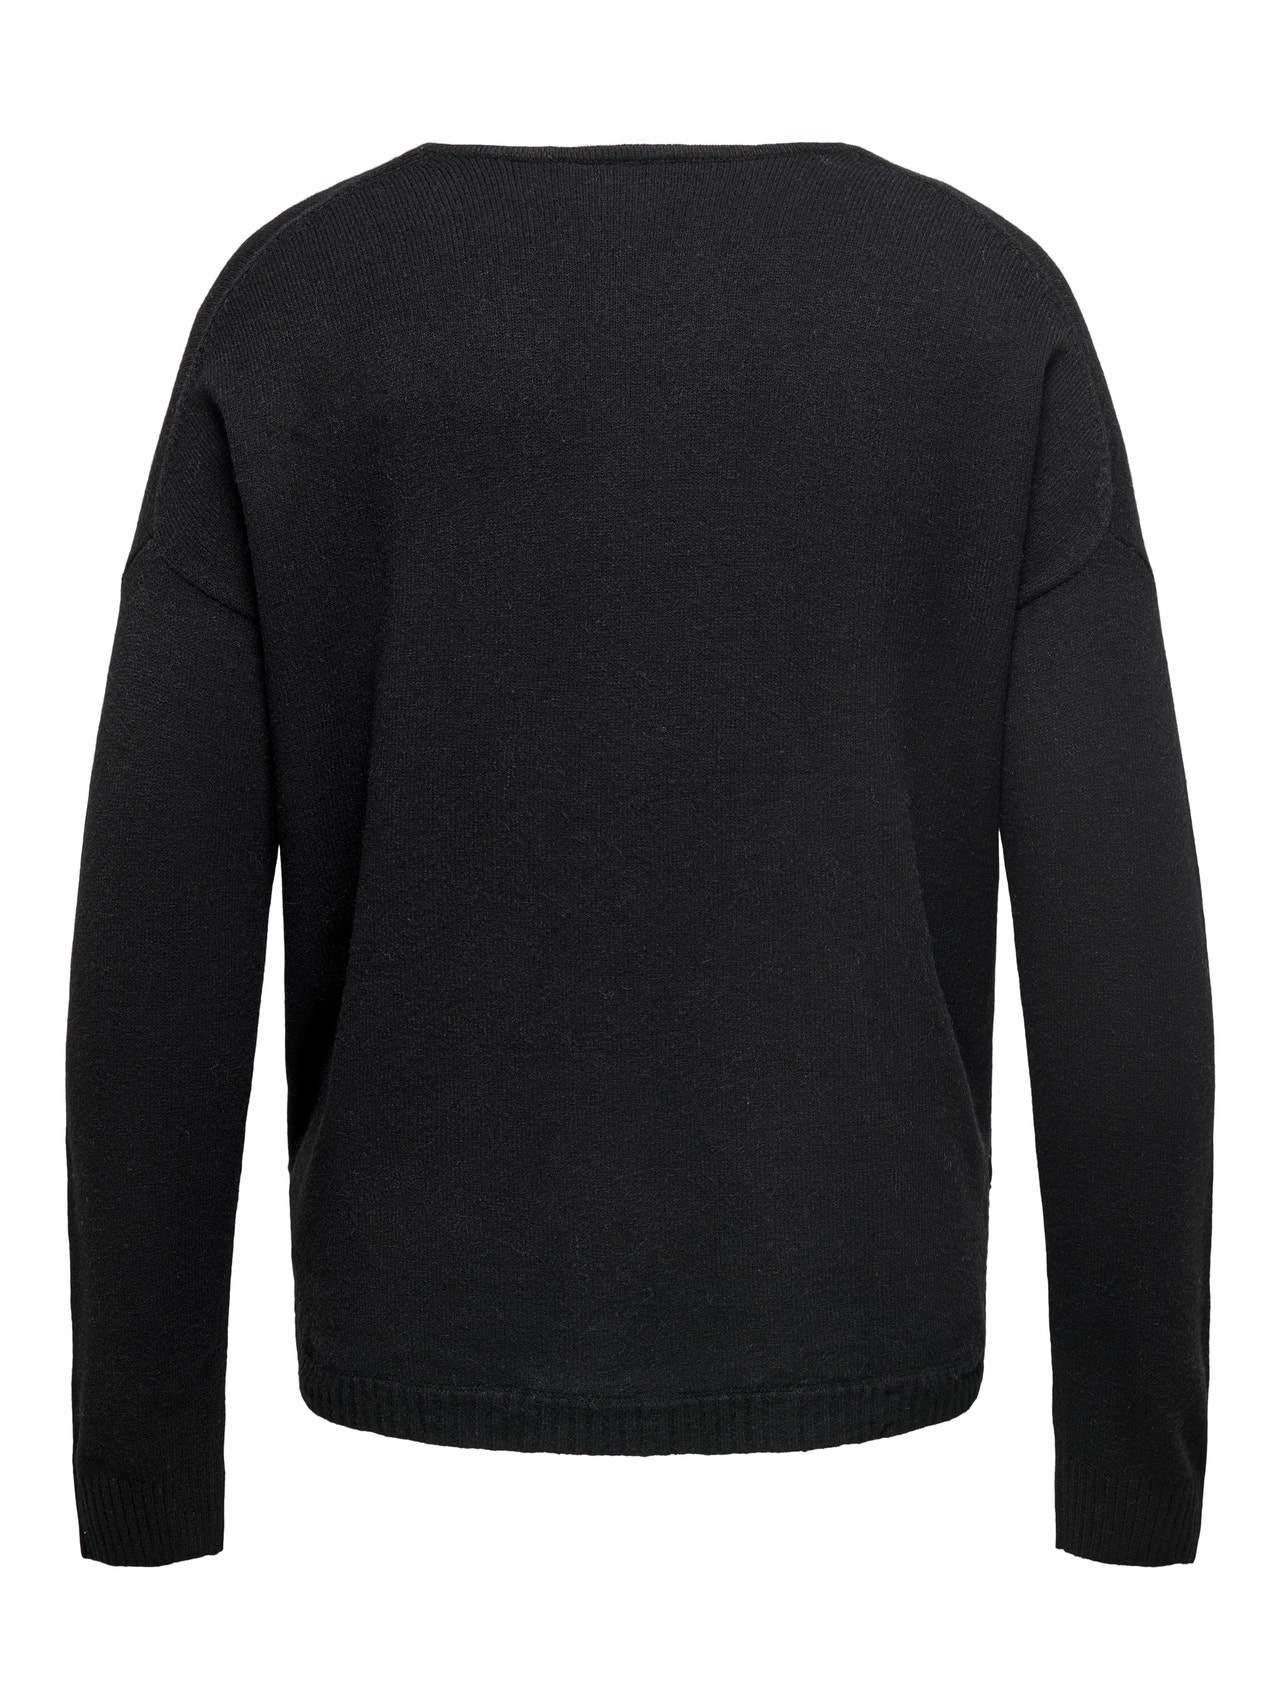 ONLY Curvy V-neck Knitted Pullover -Black - 15267202